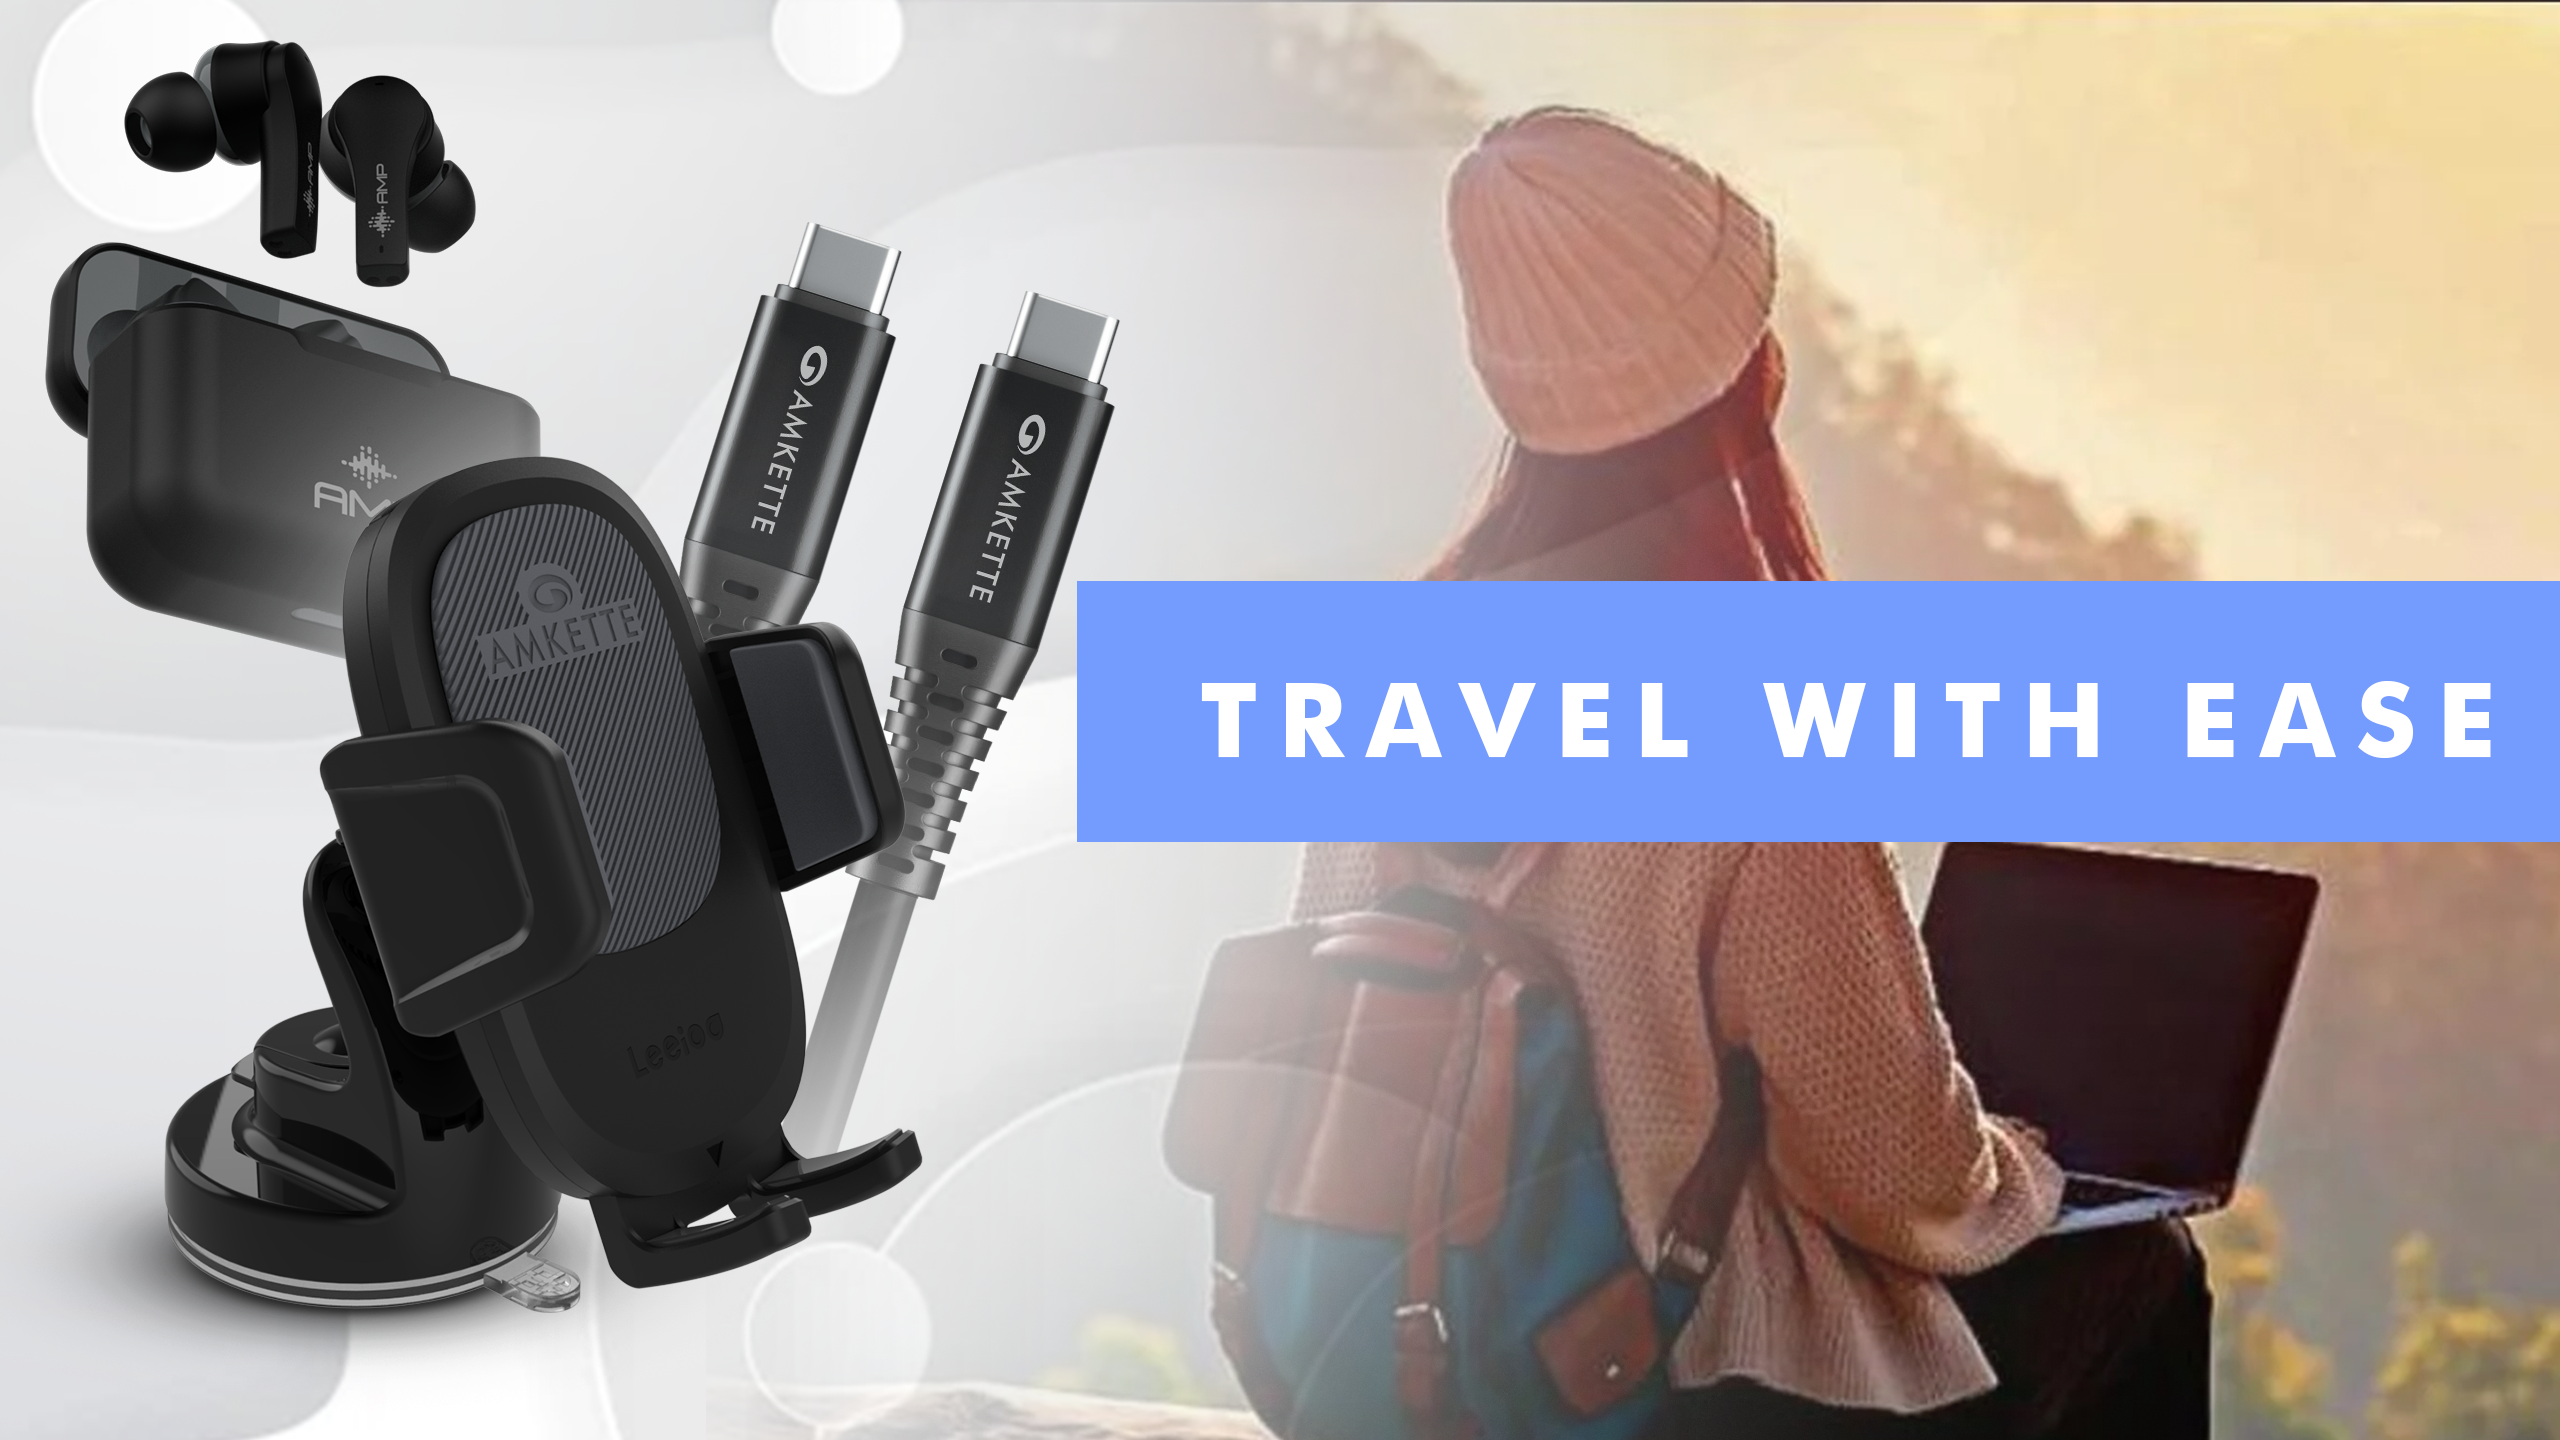 Must-Have Gadgets and Accessories According to Travel Bloggers